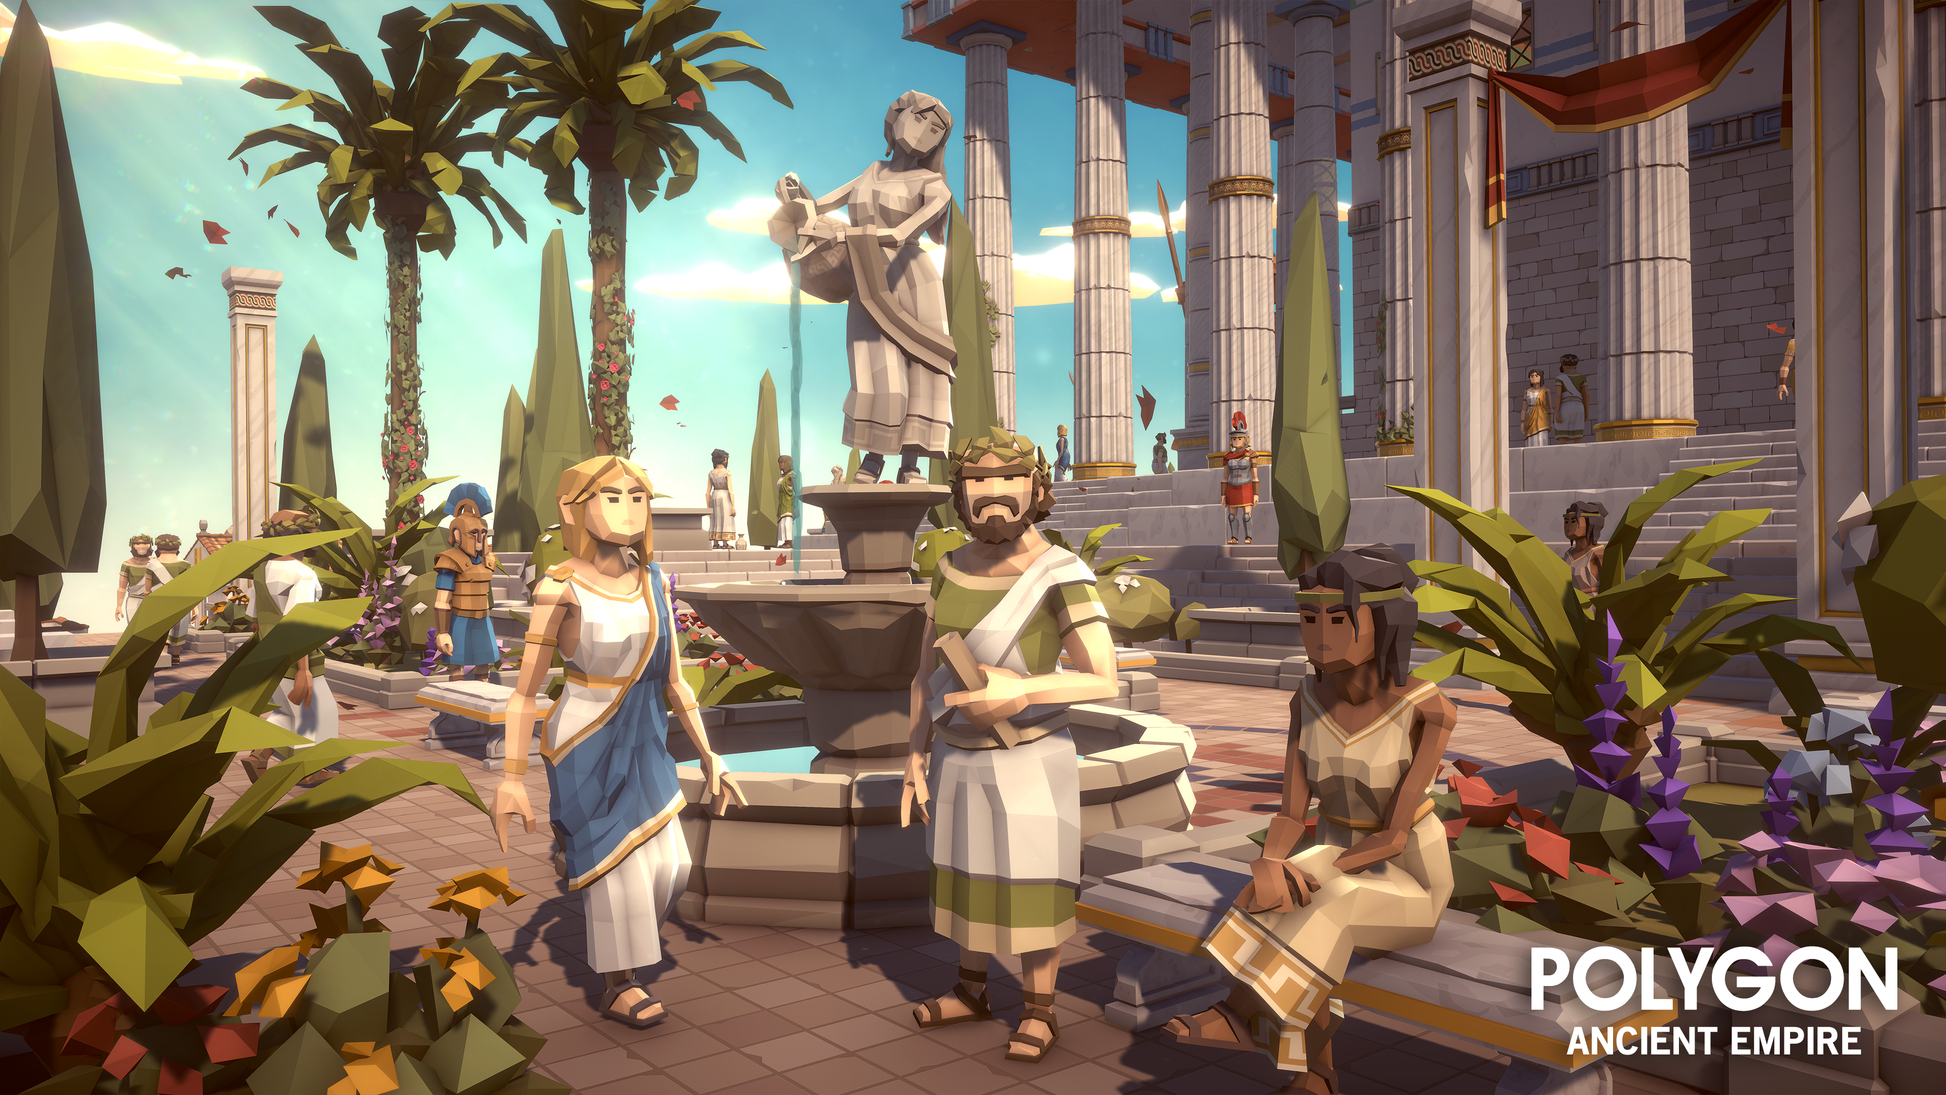 Ancient empire low poly characters sitting next to a fountain in an amphitheatre